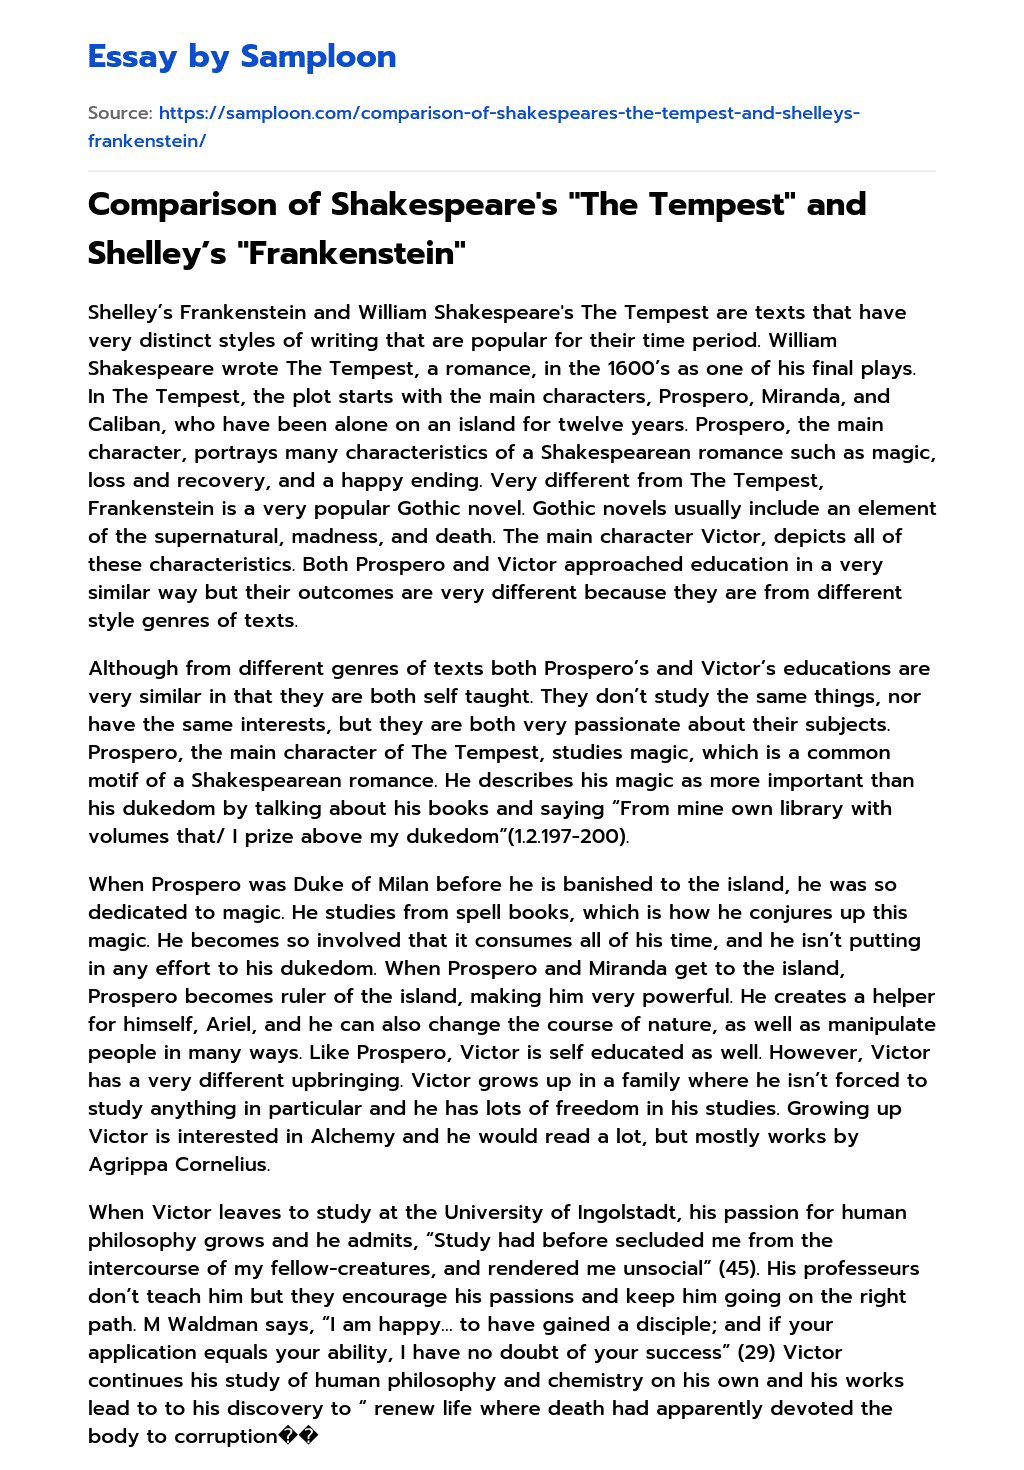 Comparison of Shakespeare’s “The Tempest” and Shelley’s “Frankenstein” Analytical Essay essay